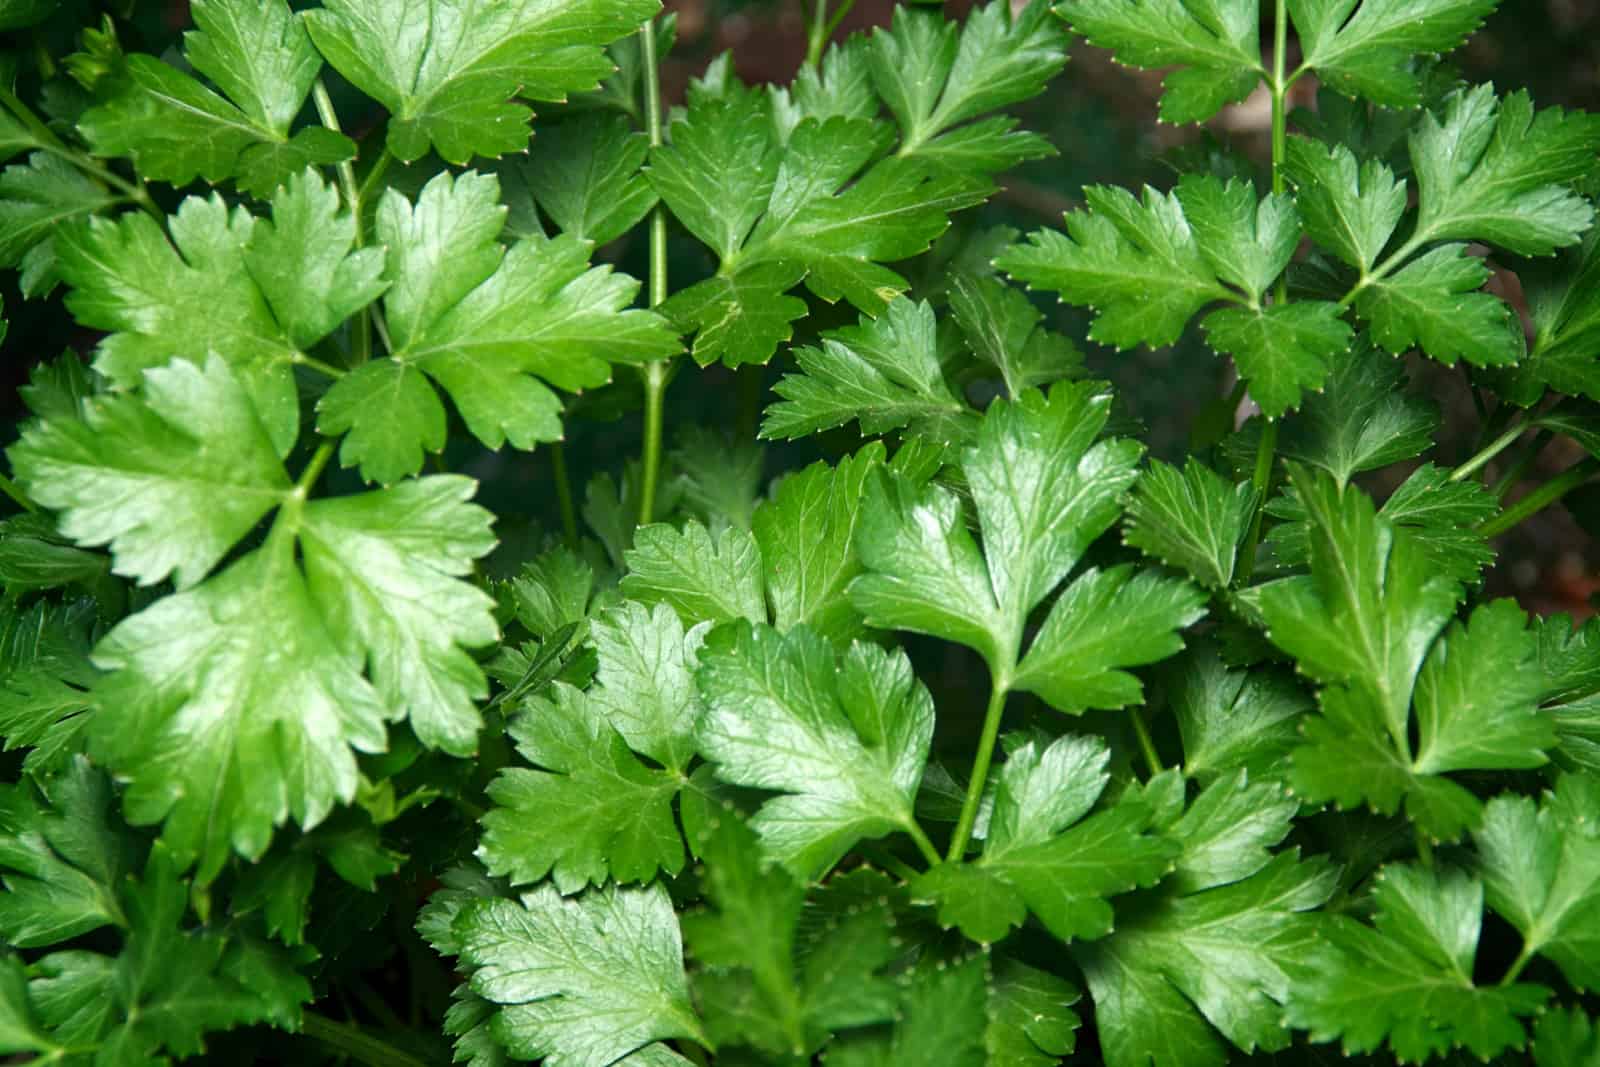 Looking down on the vibrant green leaves of the flat italian parsley plant.